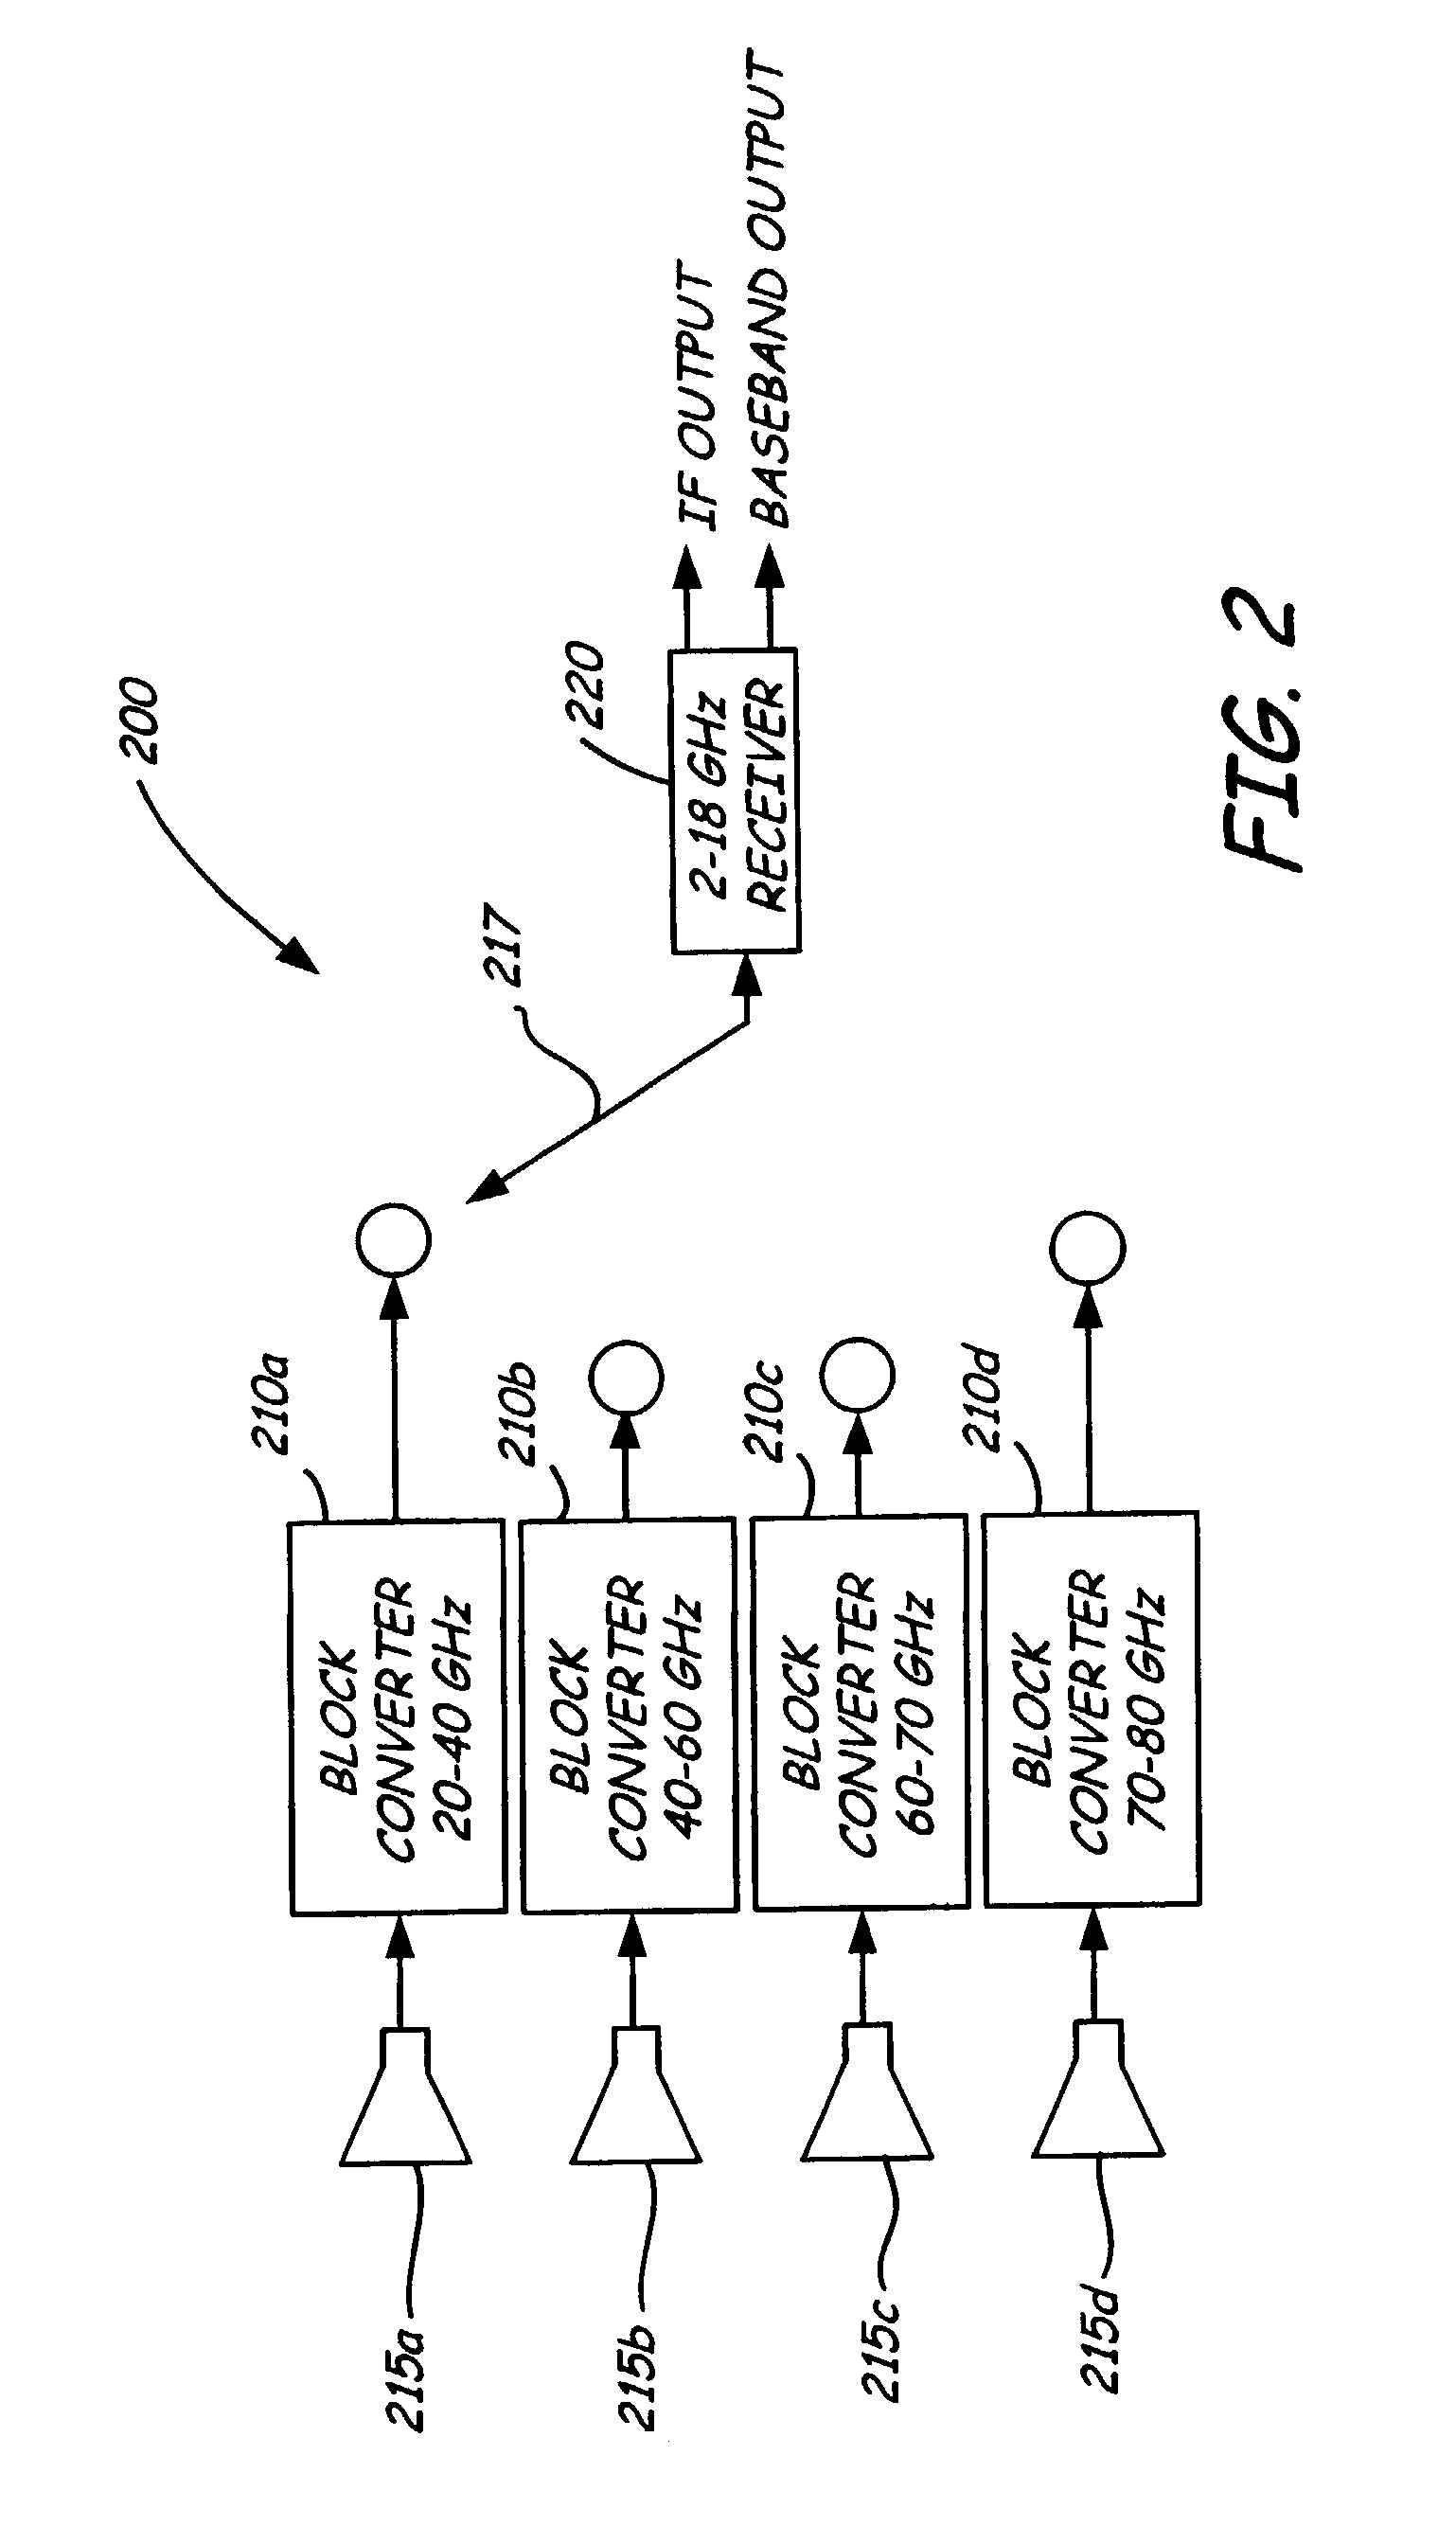 Electro optical microwave communications system